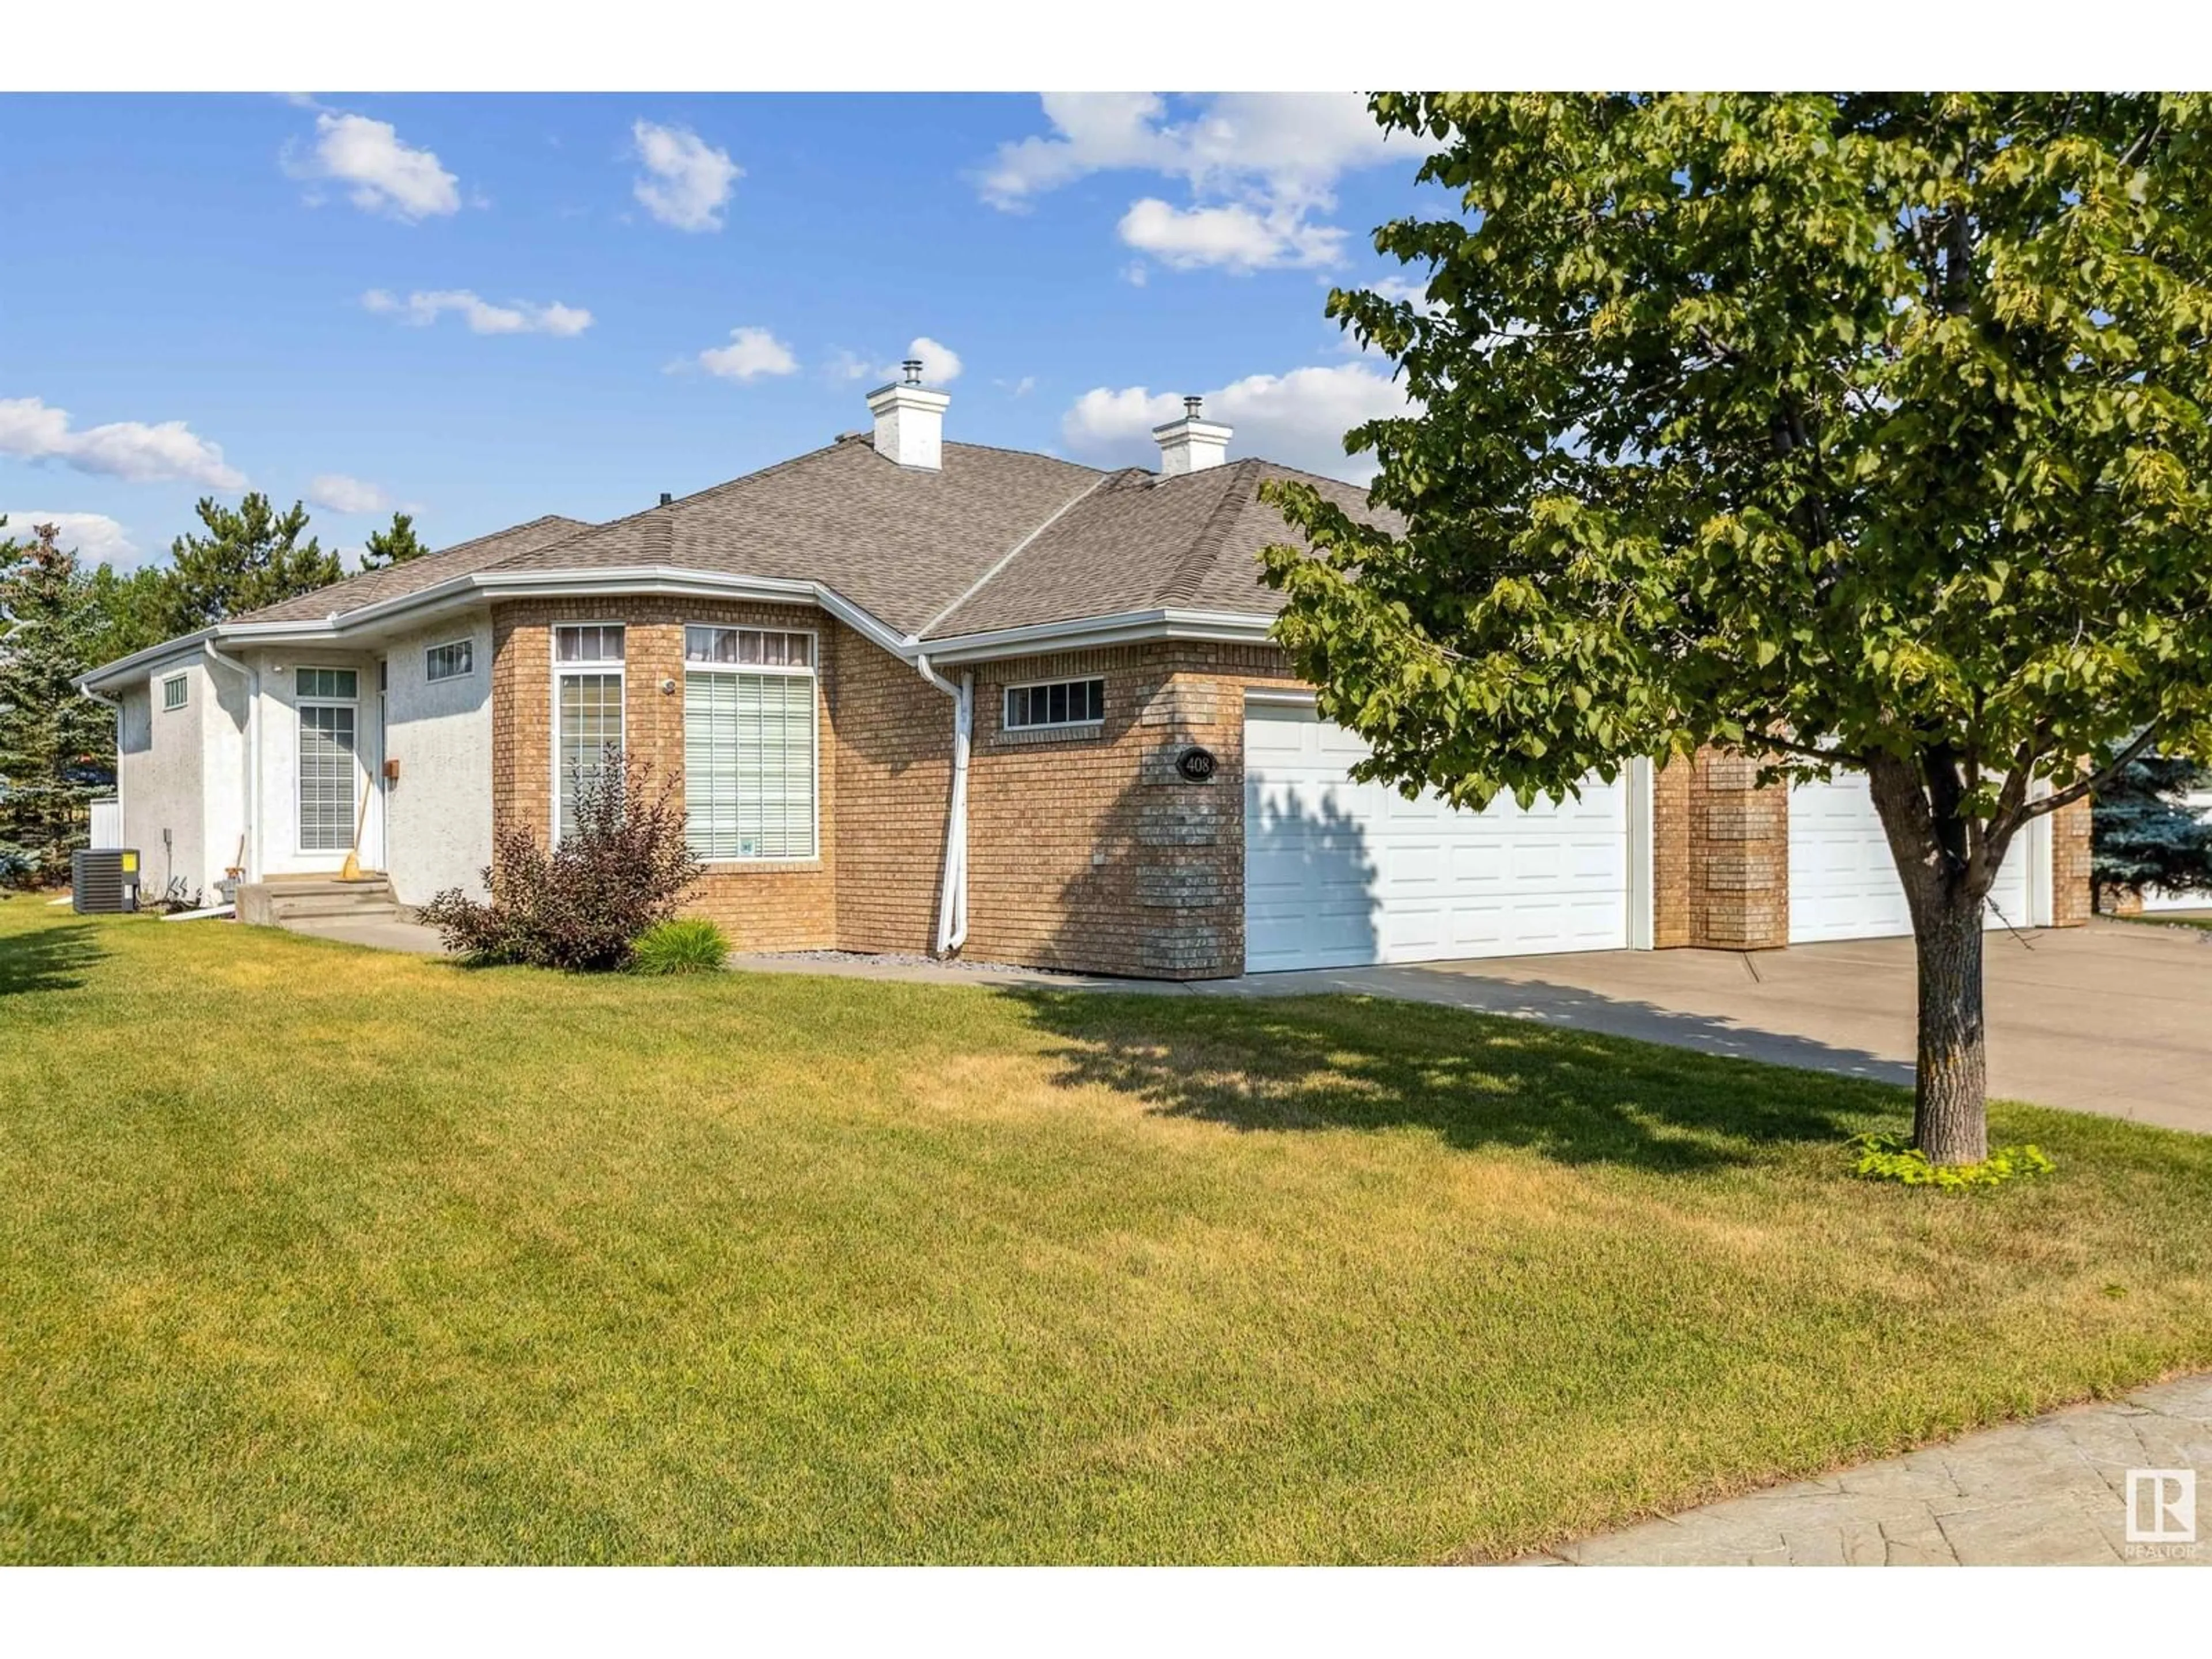 Frontside or backside of a home for 408 Tory PT NW, Edmonton Alberta T6R3L8